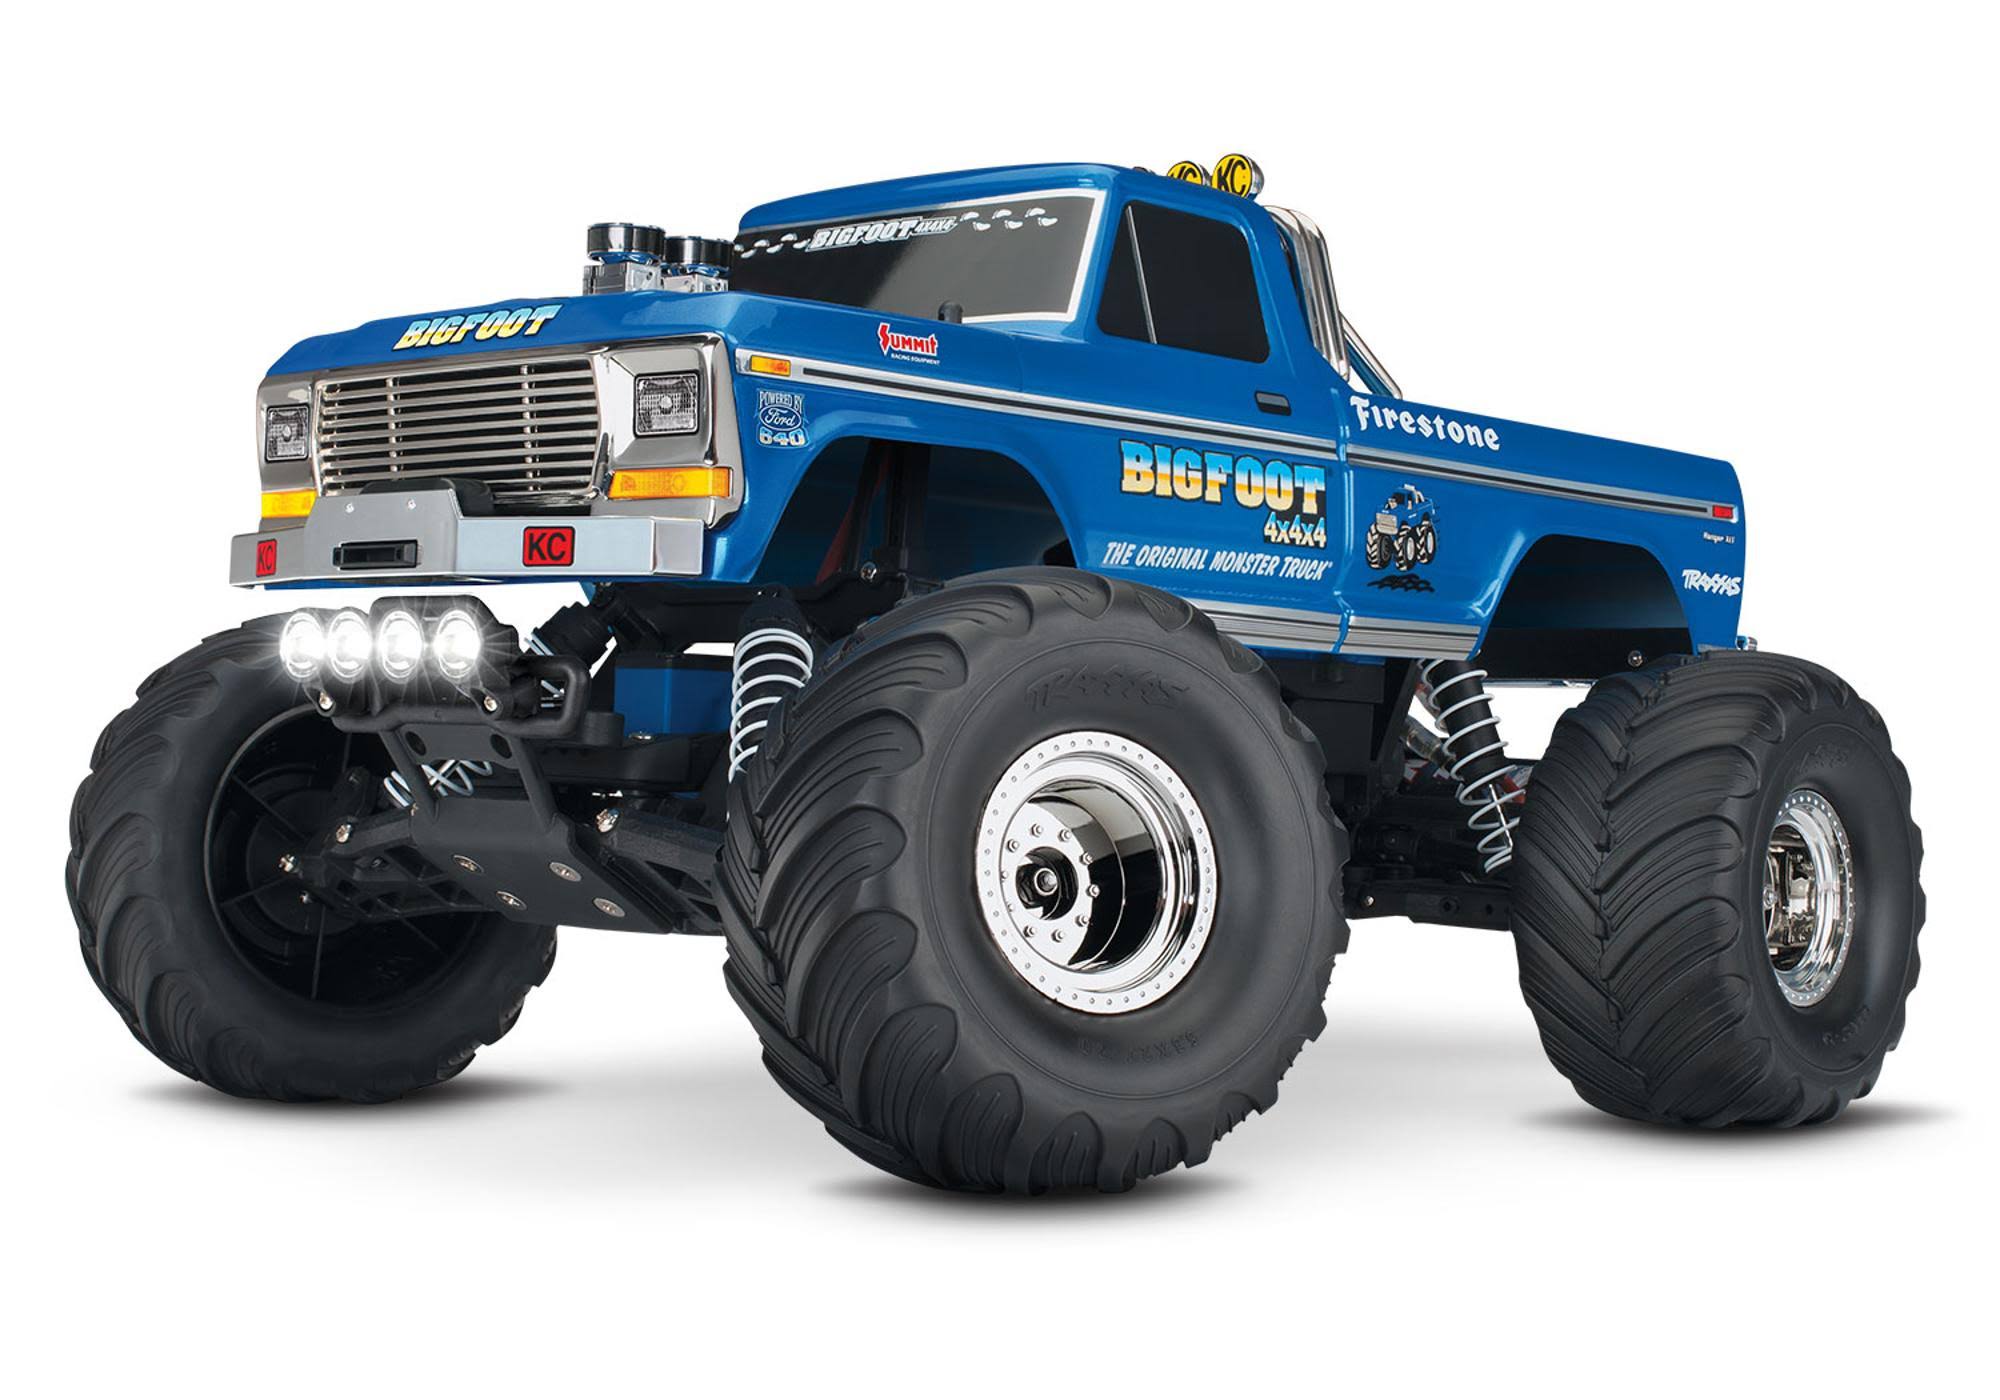 TRAXXAS TRA 36034-61 BIGFOOT No. 1: 1/10 Scale Officially Licensed Replica Monster Truck. Ready-to-Race with TQ 2.4GHz radio system, XL-5 ESC (fwd/rev